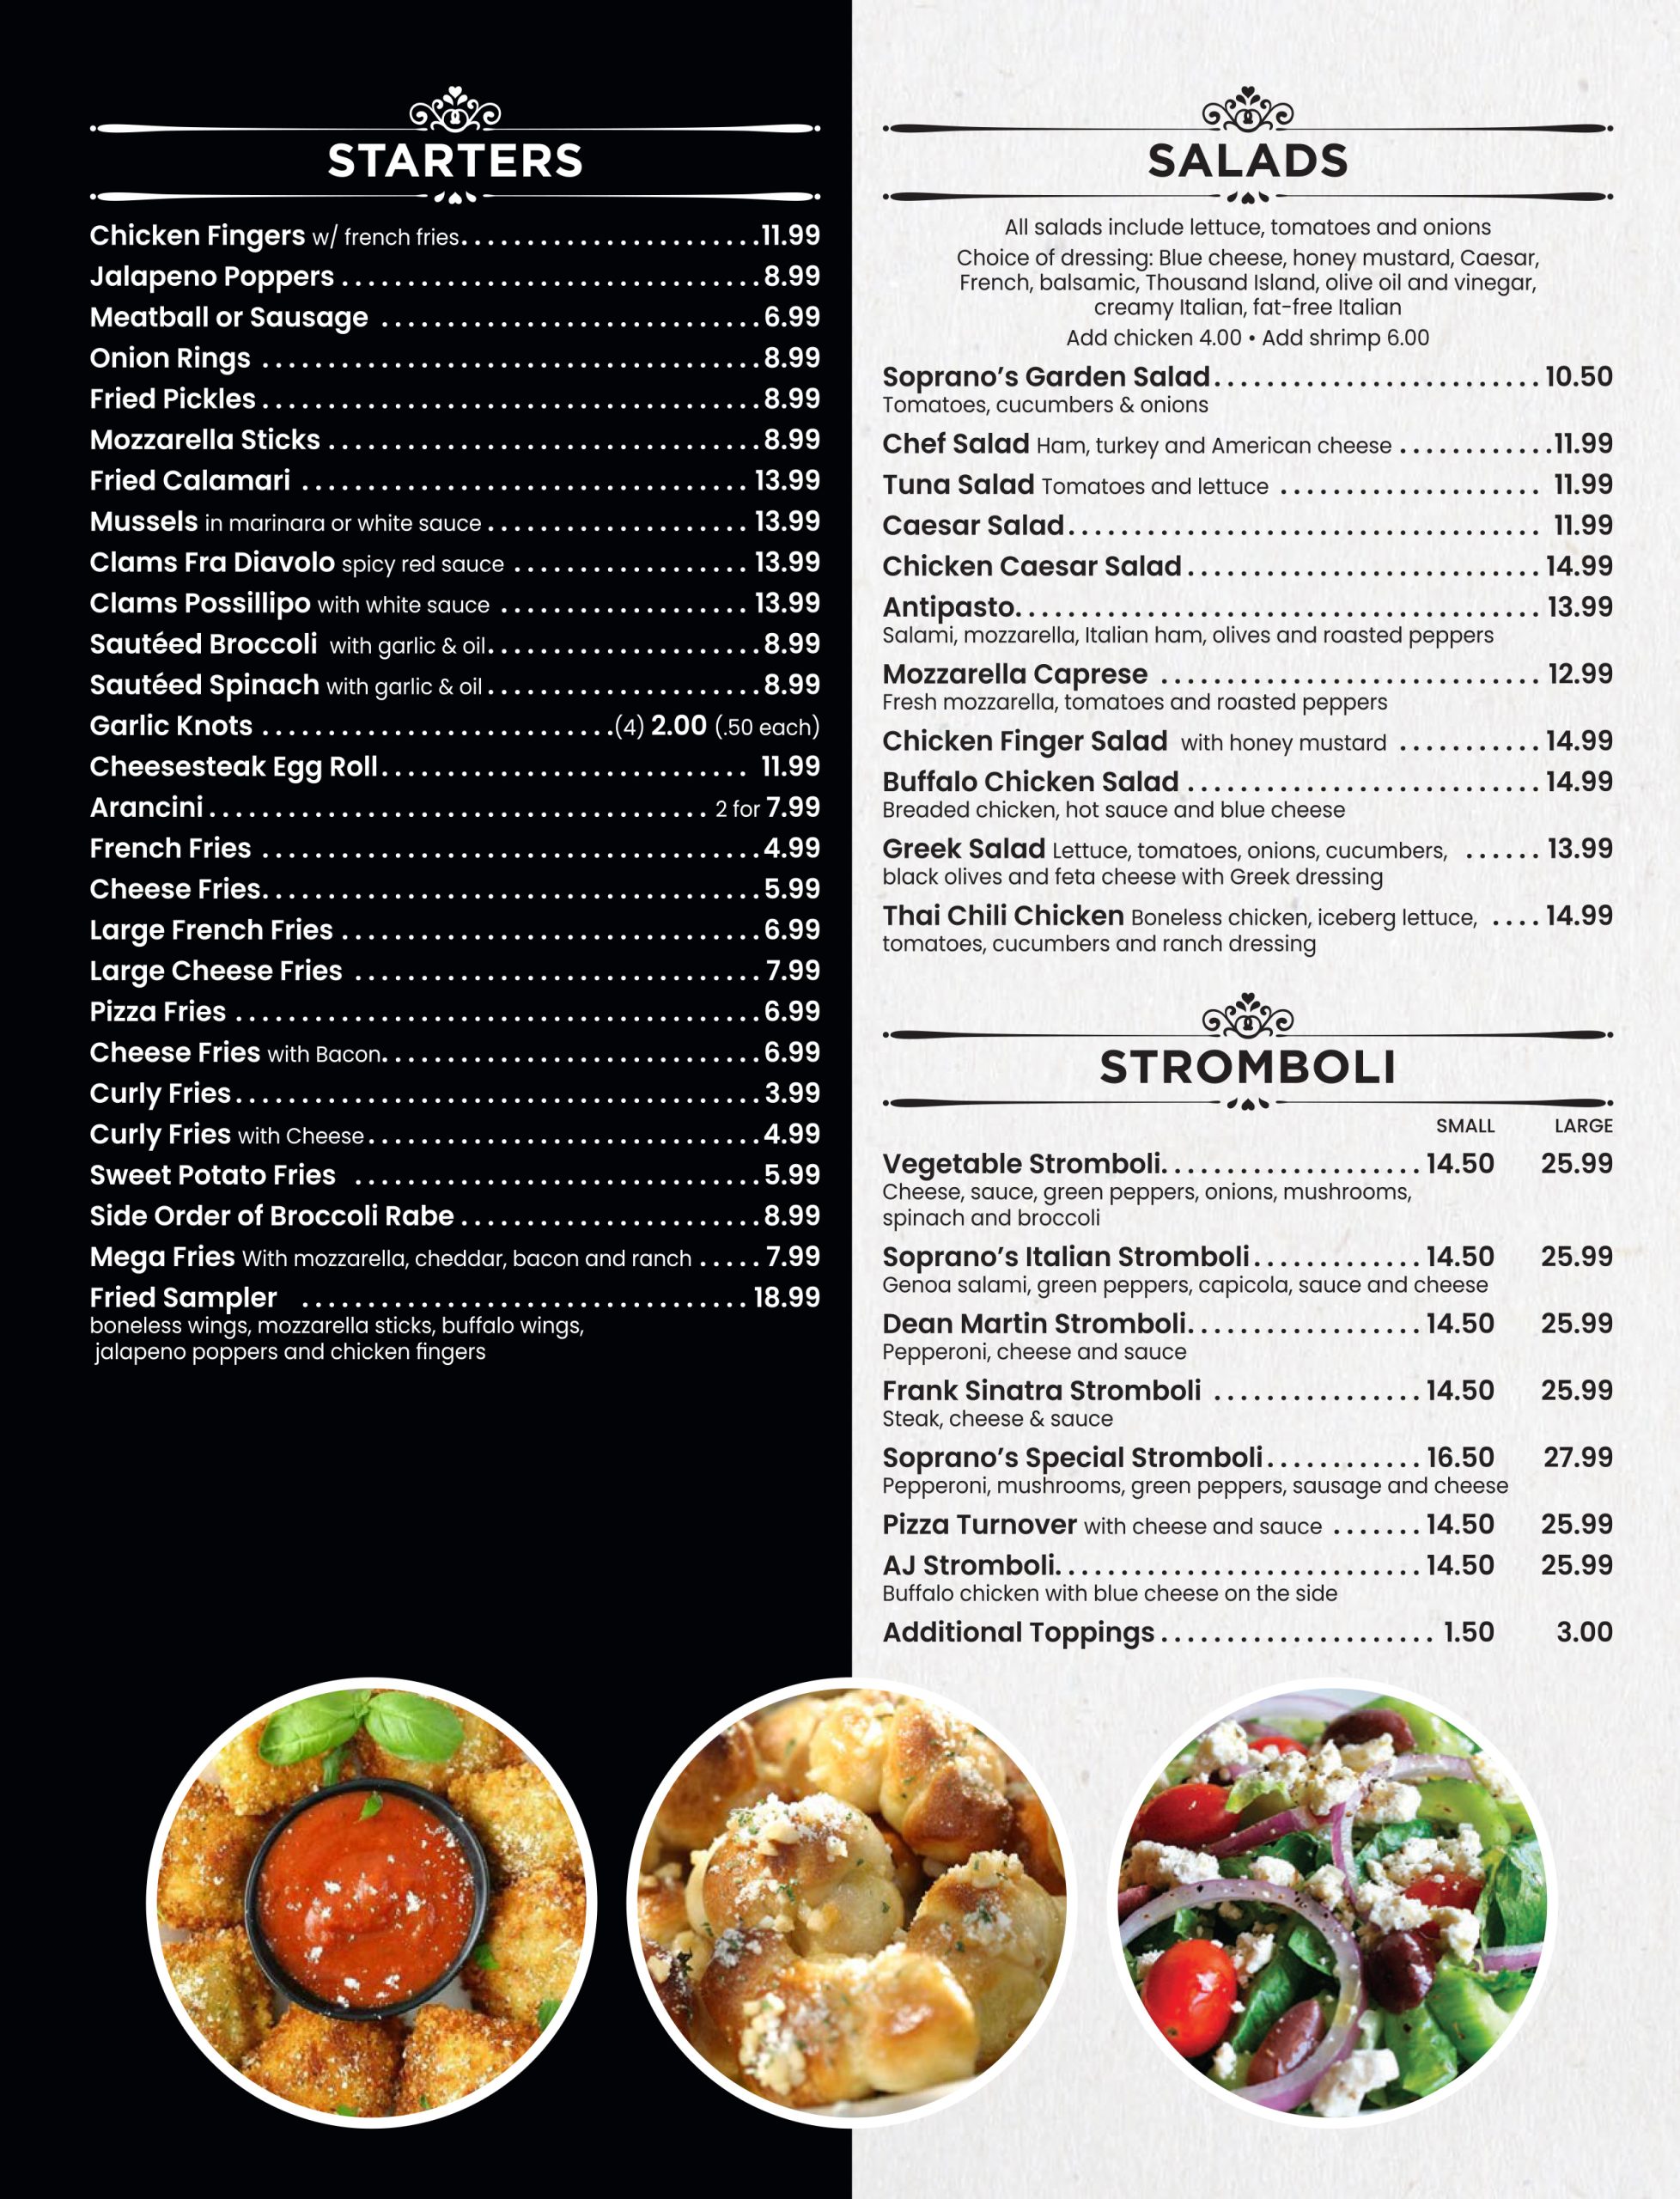 Menu of a restaurant showcasing various dishes including starters, salads, and stromboli with corresponding prices.